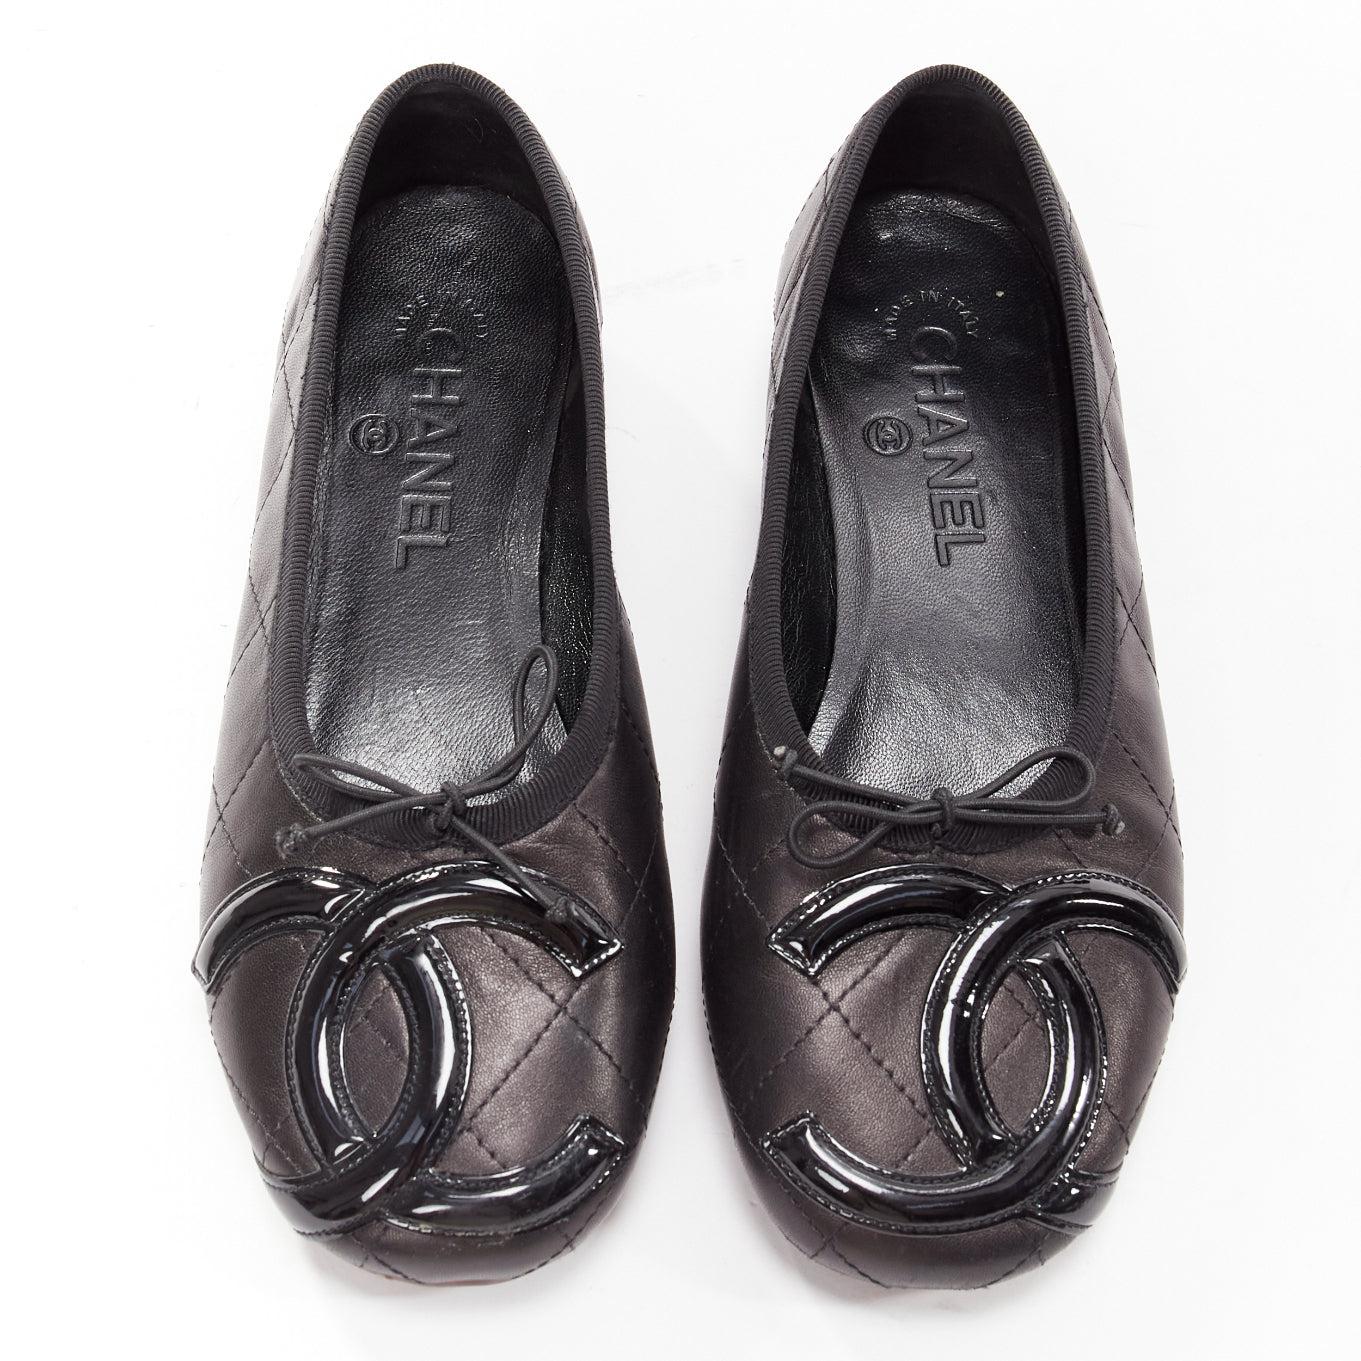 CHANEL Cambon black CC logo quilted bow front ballerina flats EU35
Reference: YIKK/A00076
Brand: Chanel
Collection: Cambon
Material: Leather
Color: Black
Pattern: Solid
Closure: Slip On
Lining: Black Leather
Extra Details: Rubber soles.
Made in: